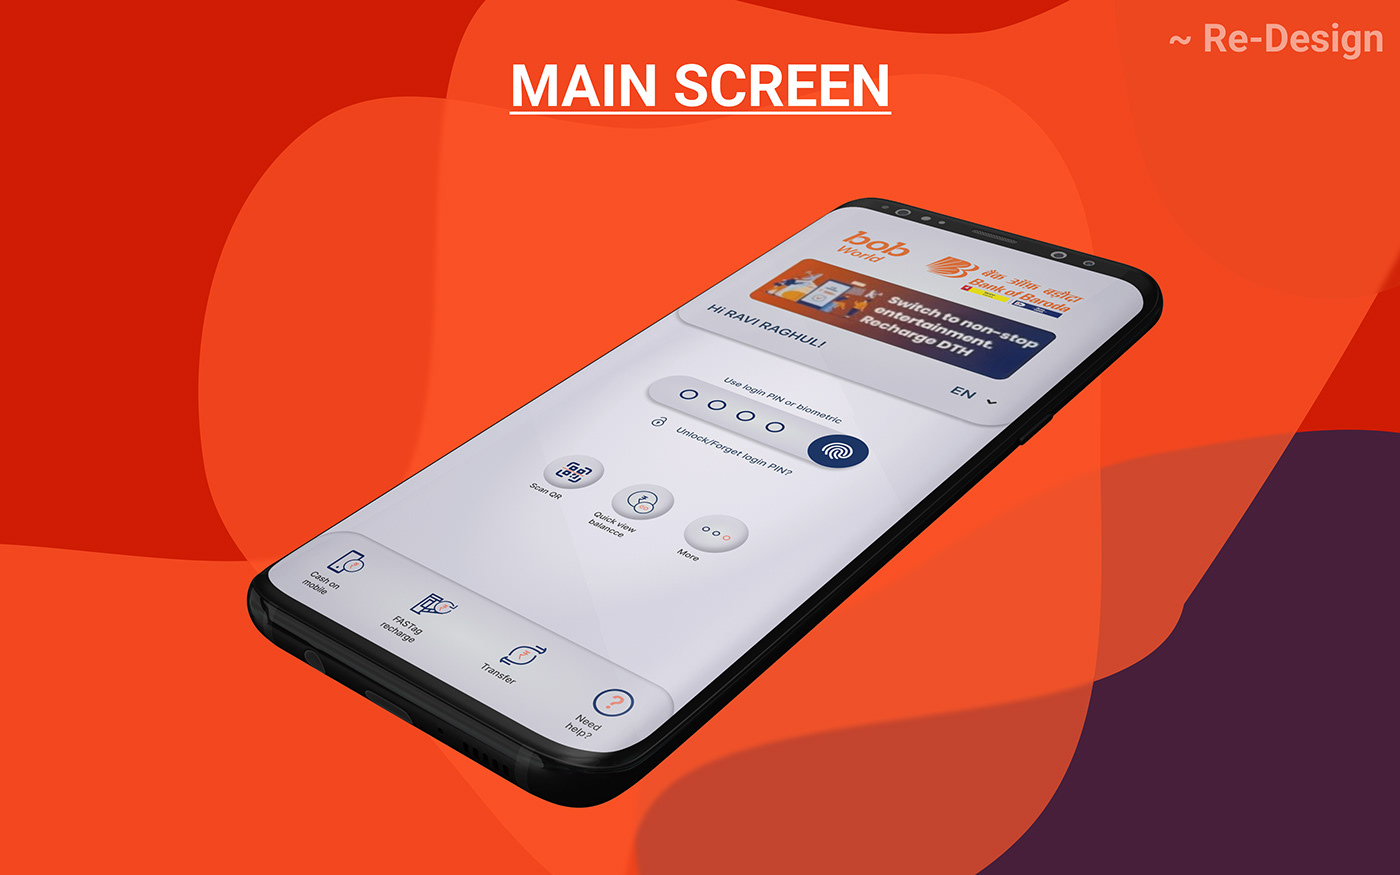 security redesign UI/UX user interface user experience user interface design bank of baroda mobile banking Net Banking online payment